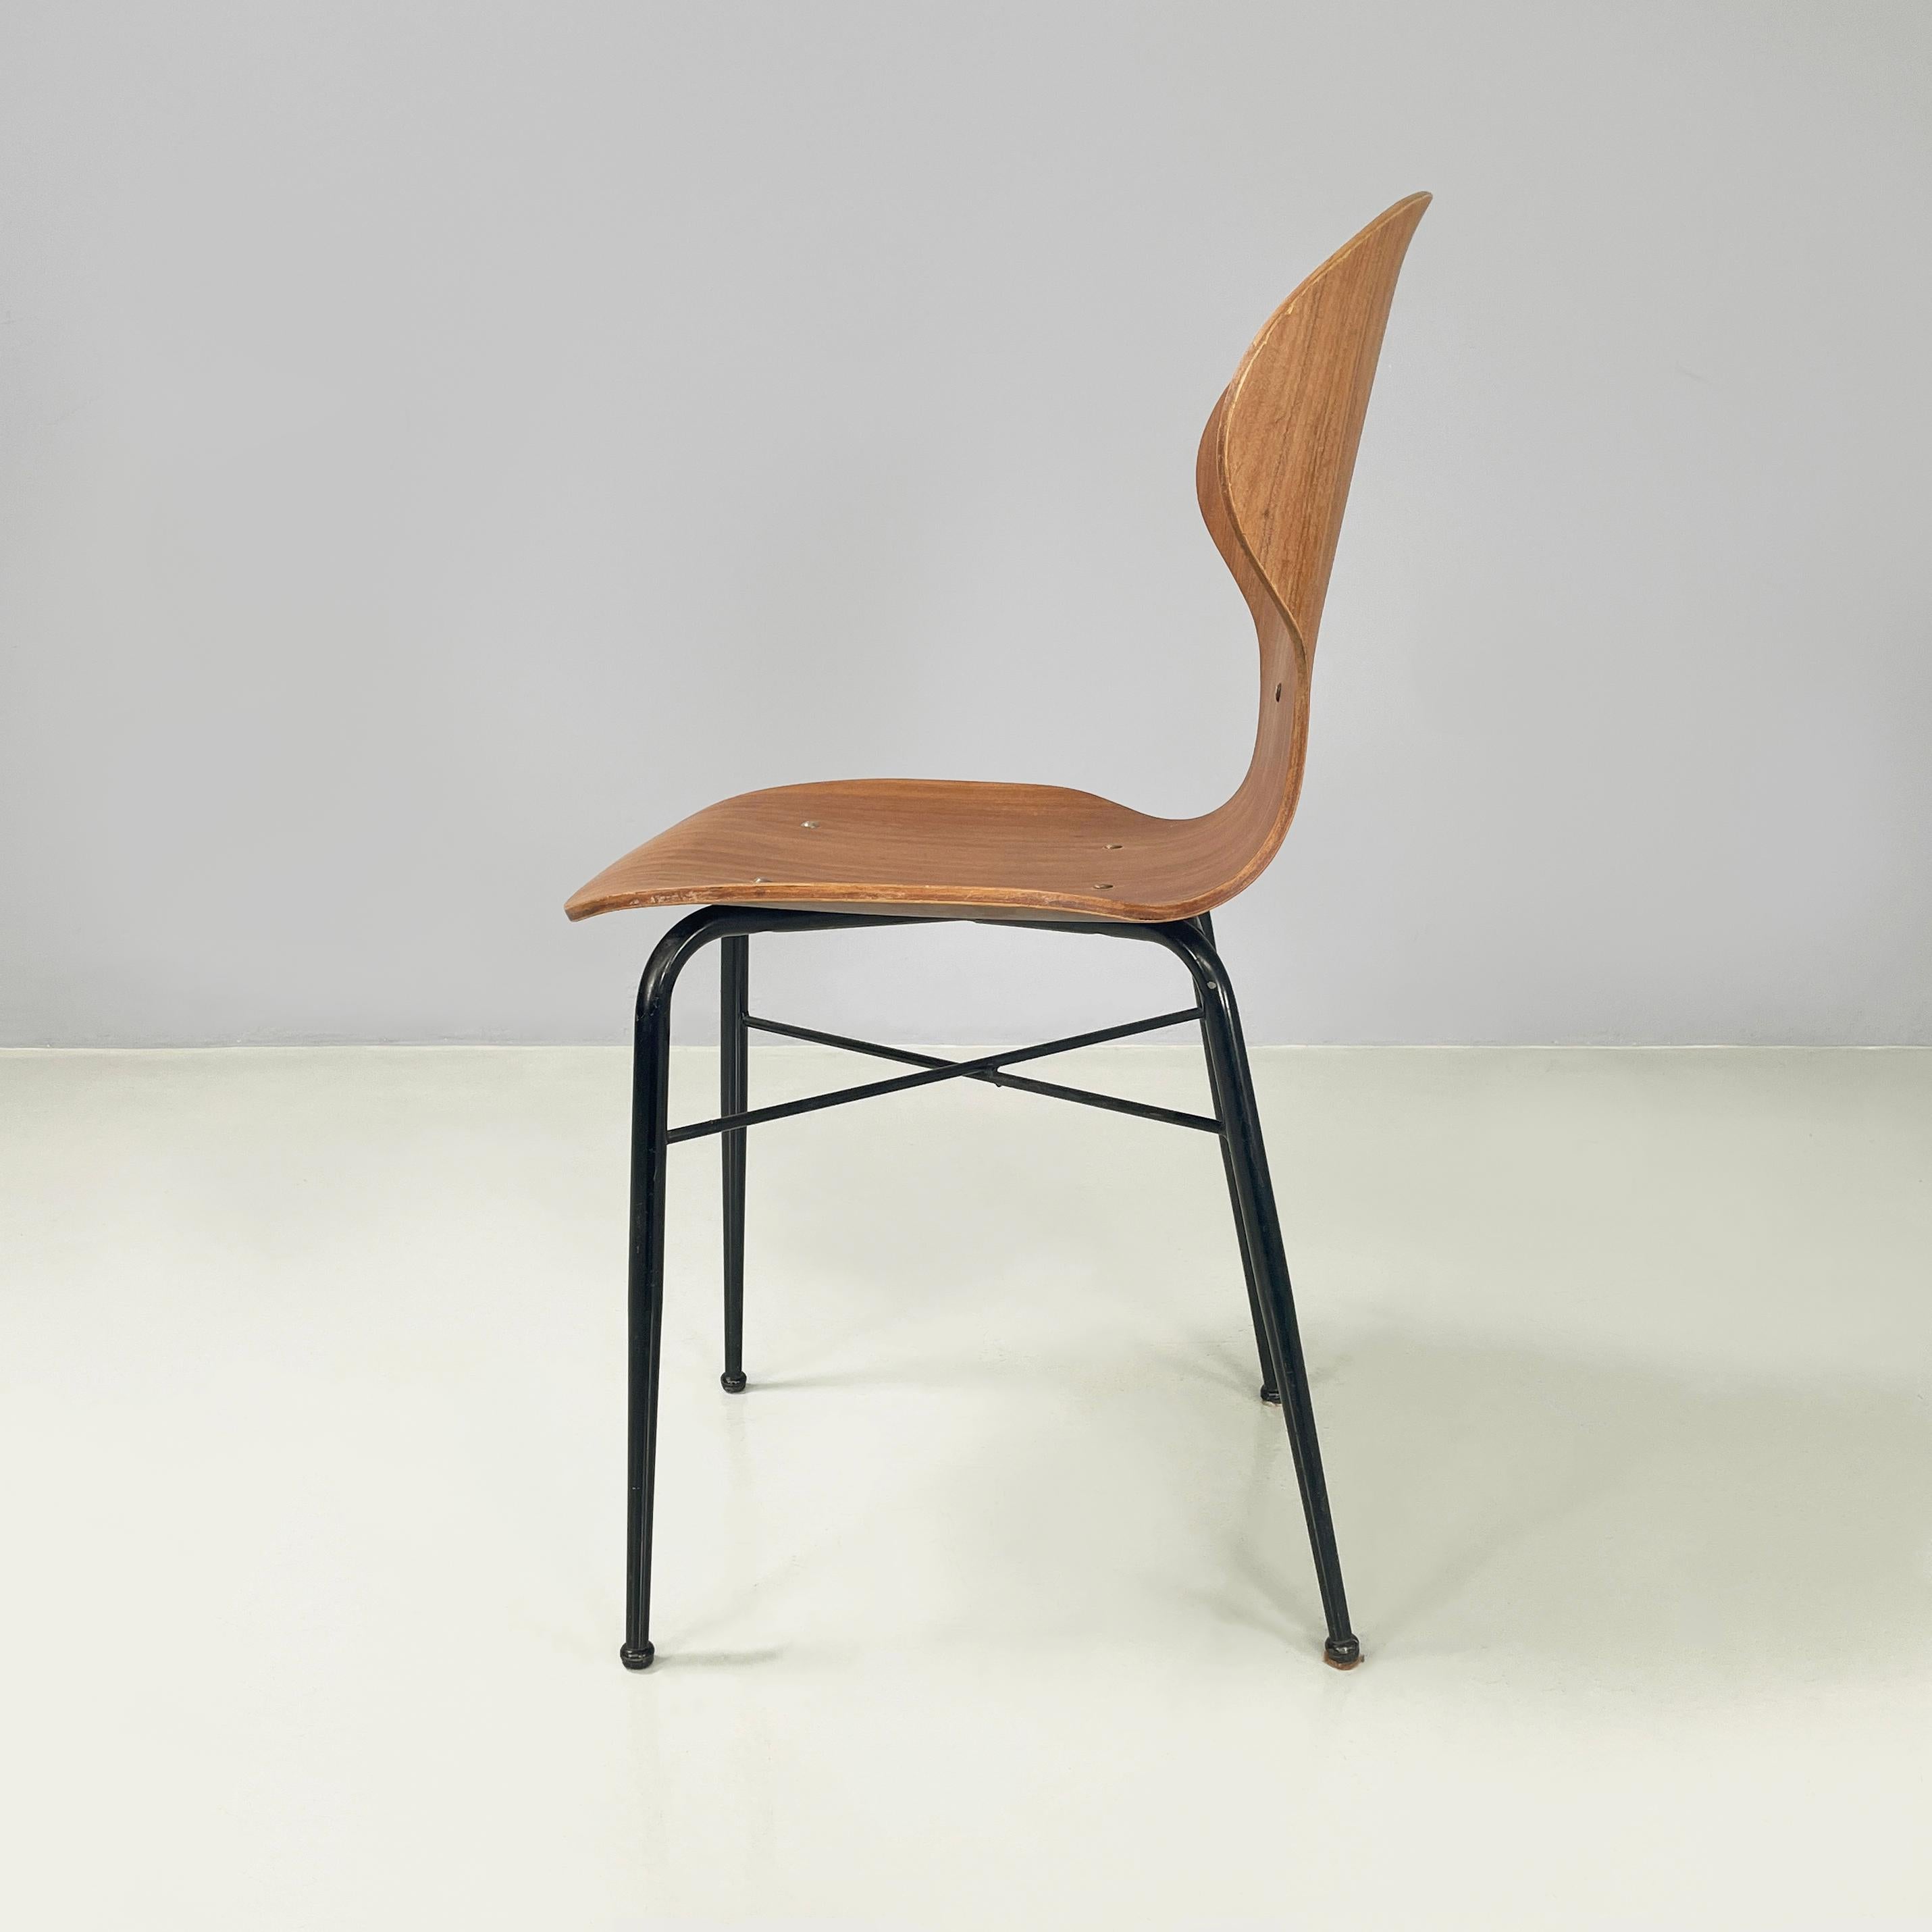 Italian mid-century modern Chair in curved wood and black metal, 1960s
Chair with shaped seat and back in curved wood. On the backrest it has a decorative oval hole and round metal studs. Under the seat there is an X-shaped structure in black metal